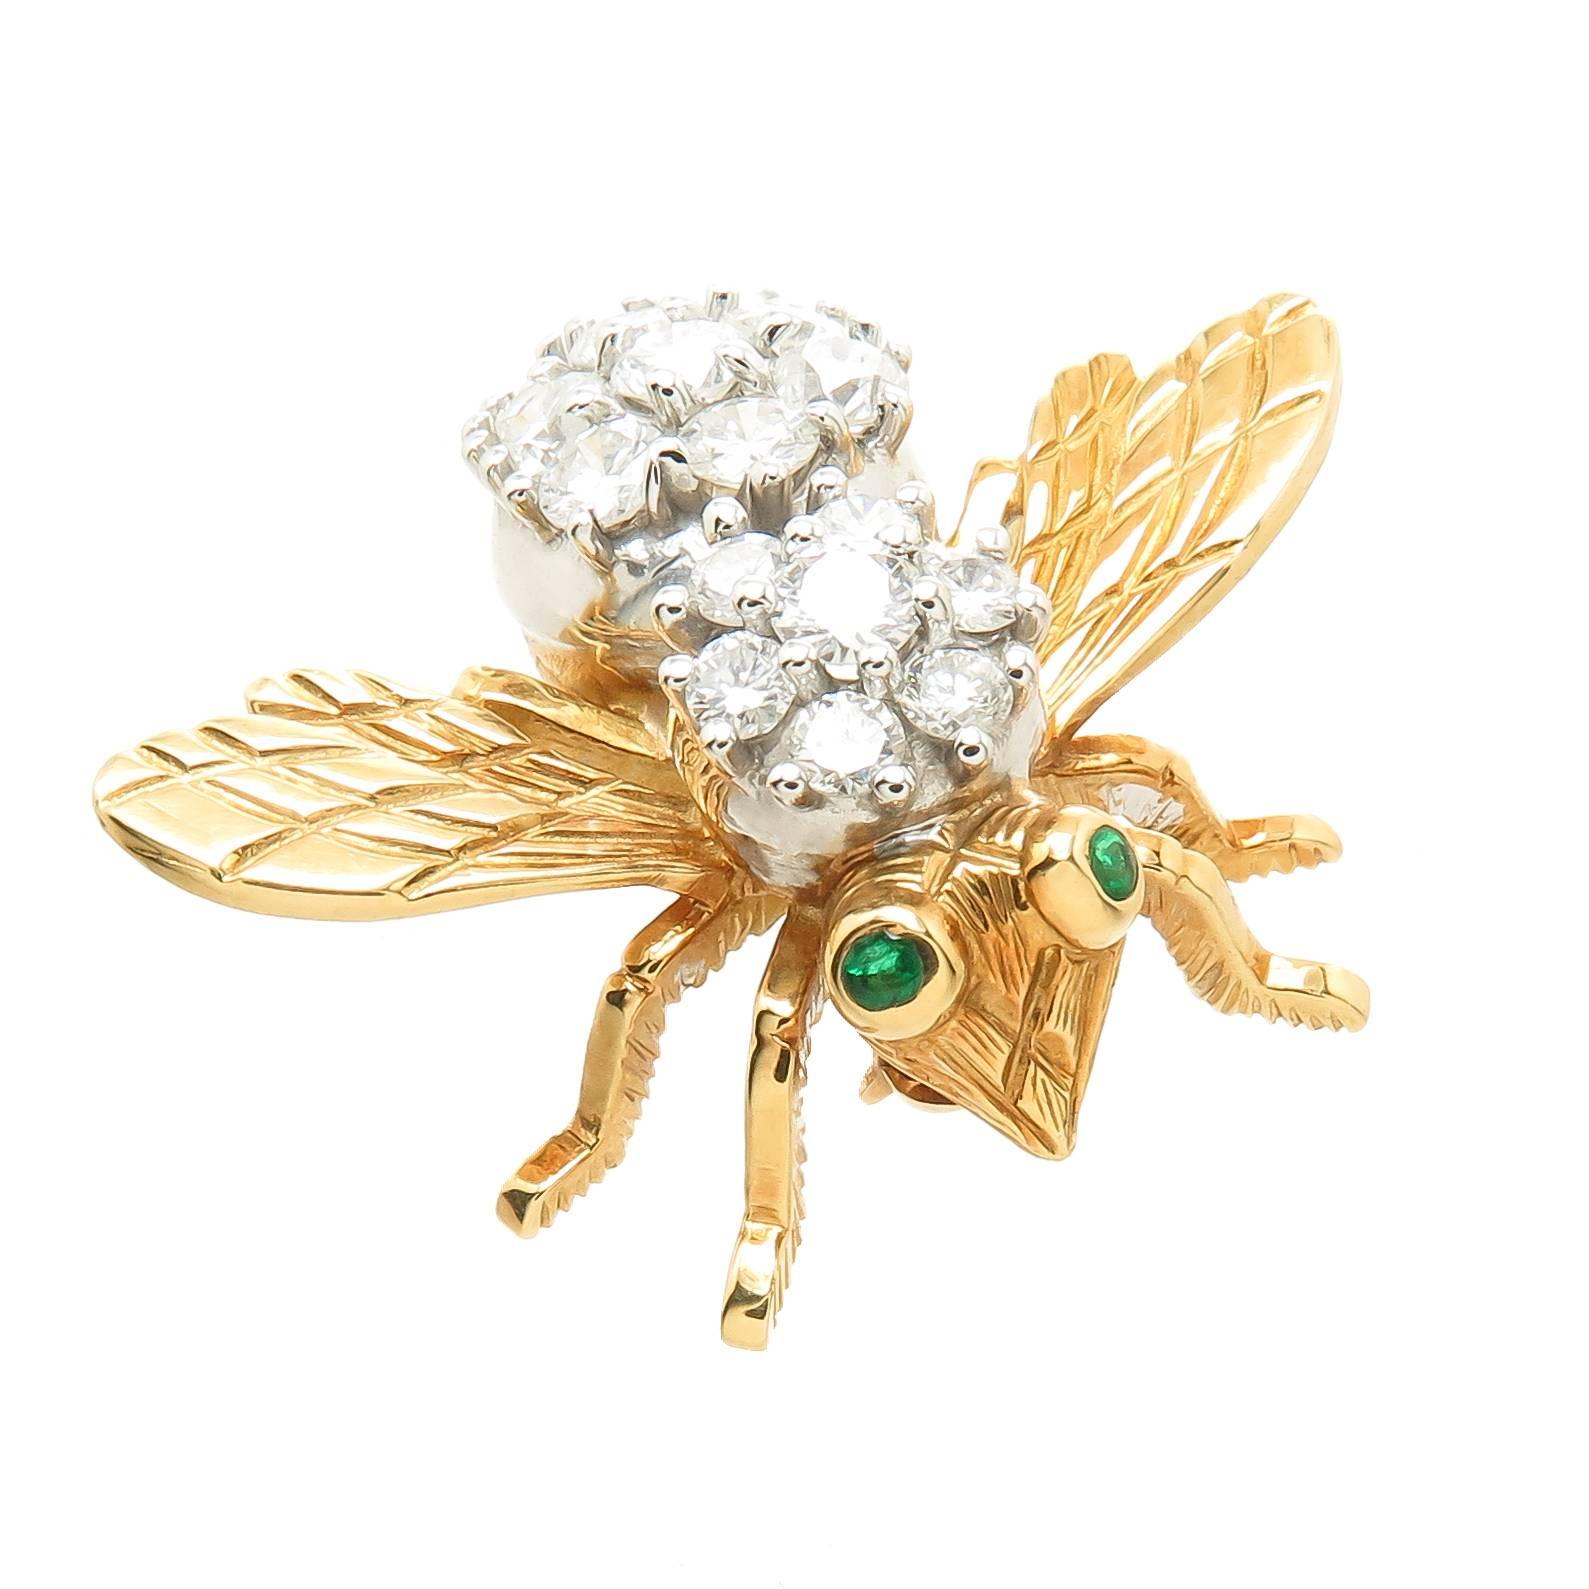 Circa 1980s Herbert Rosenthal 18K yellow Gold Bee brooch, measuring 1 1/8 inch in length and 1 3/8 inch wing tip to tip. Set with fine White, Round Brilliant cut Diamonds totaling 2 Carats and further set with Emerald Eyes.
